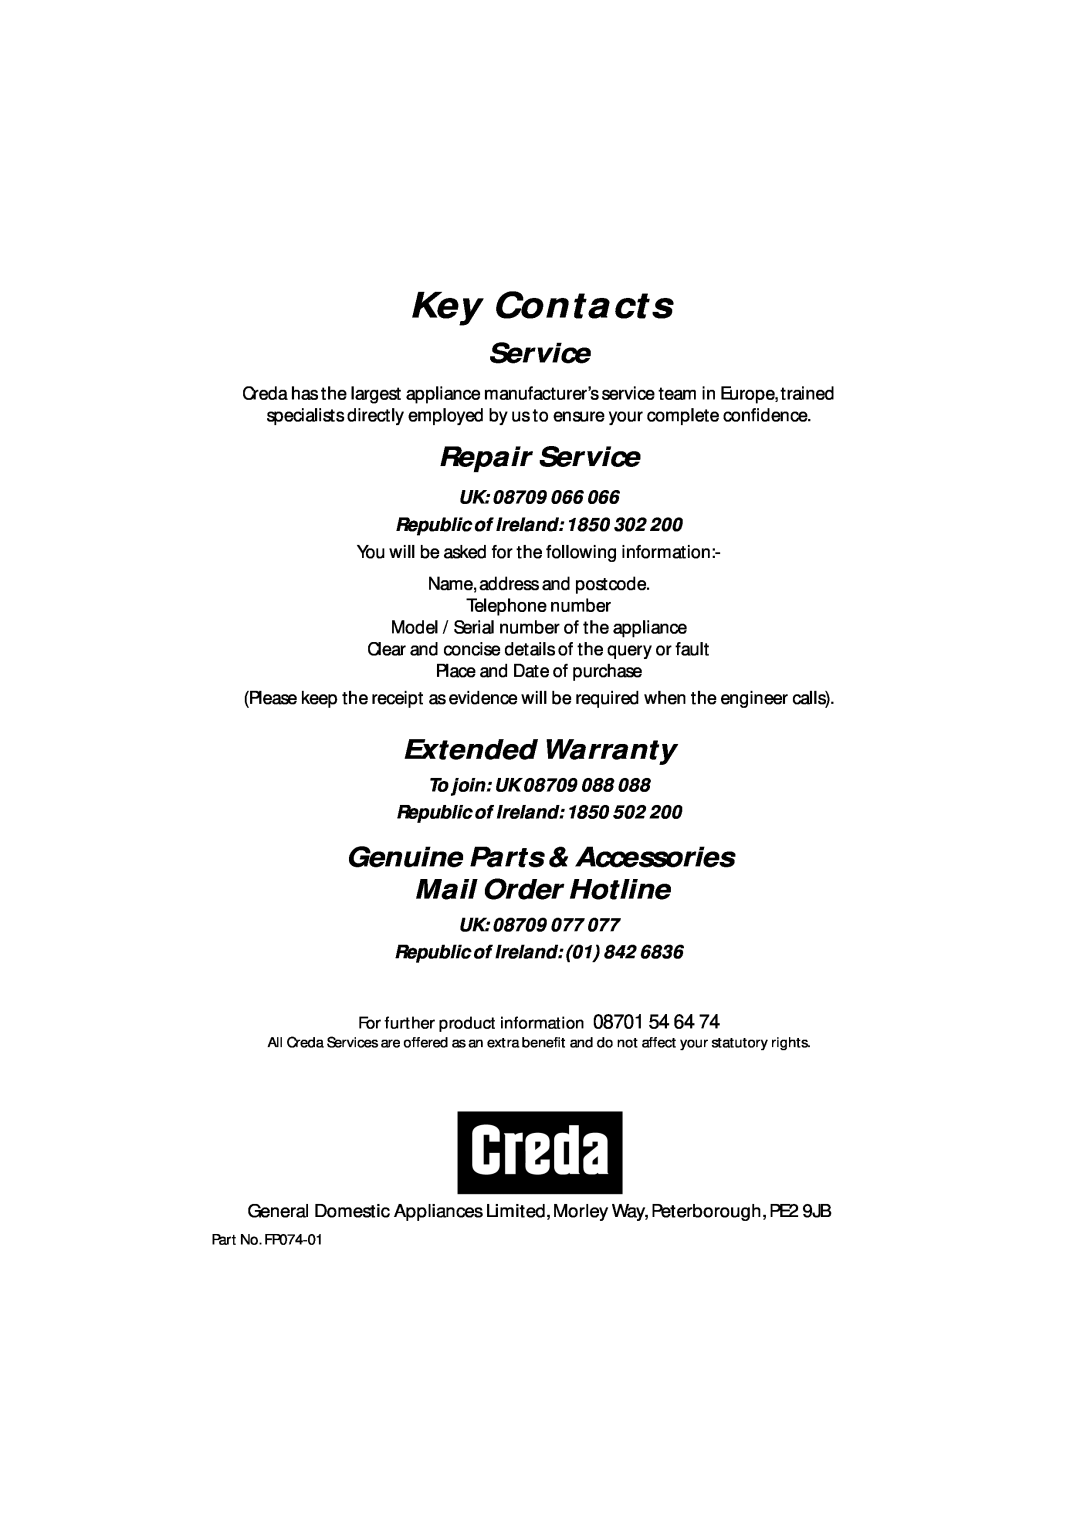 Creda CRV10 manual Key Contacts, Repair Service, Extended Warranty, Genuine Parts & Accessories Mail Order Hotline 